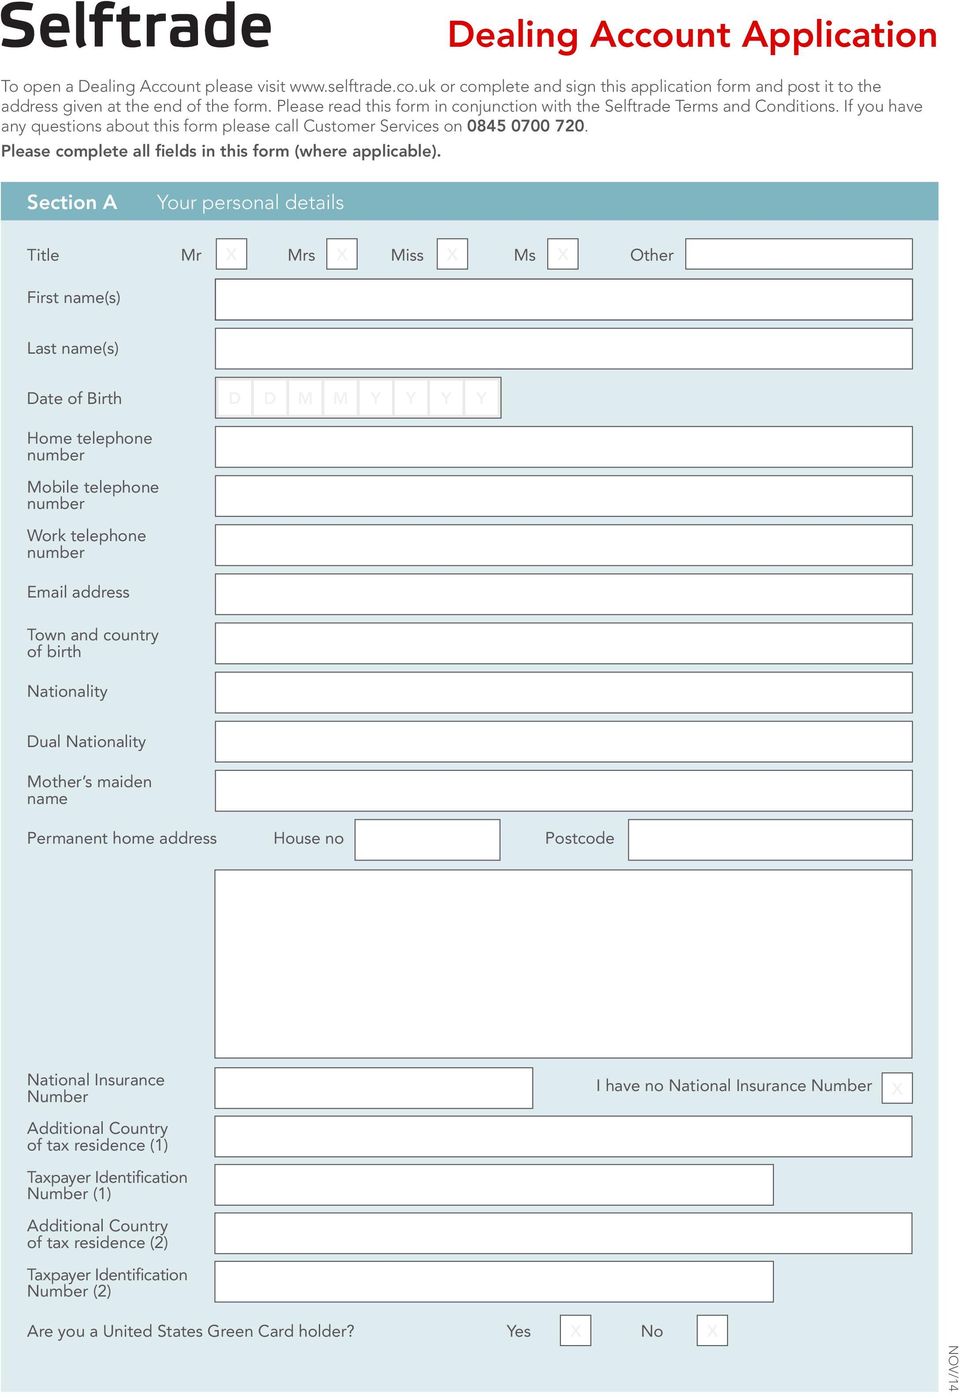 If you have any questions about this form please call Customer Services on 0845 0700 720.